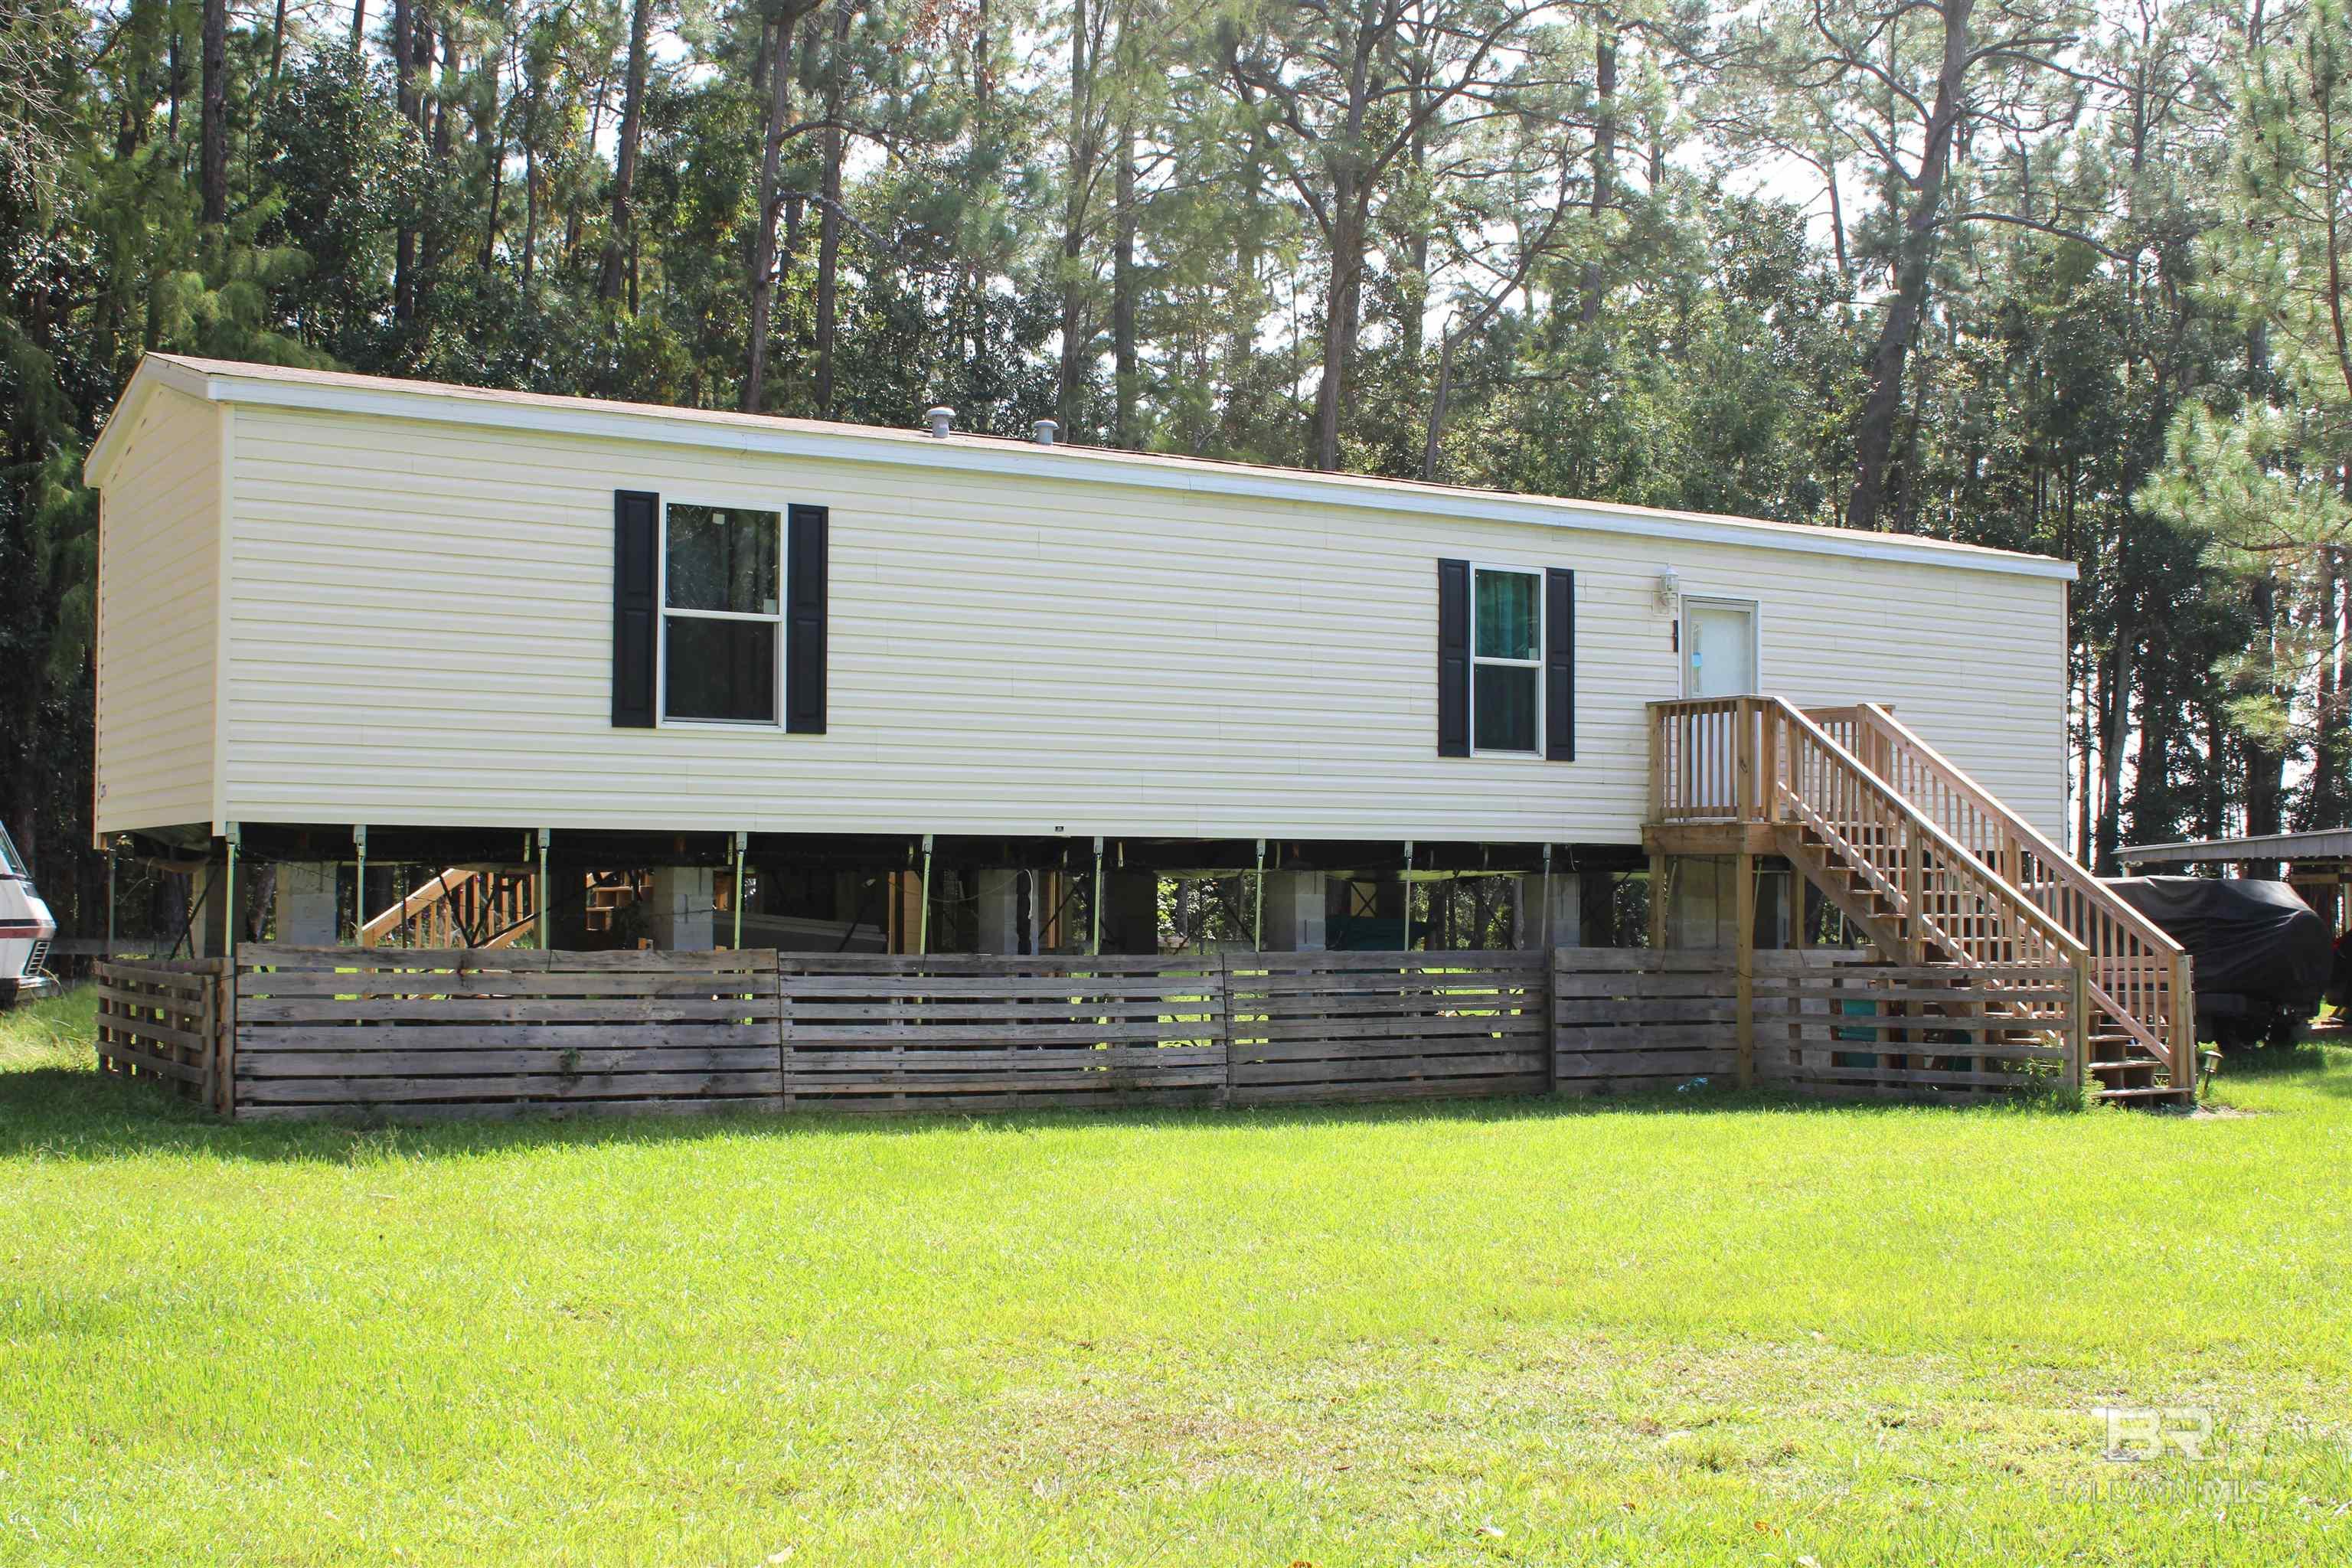 Are you looking for an affordable new home, weekend getaway, or investment property. The lots are canal front and also has a private deeded community beach on Mobile Bay that is just a two-minute, walk to watch the most amazing sunsets in the area. This home is located at the end of a dead-end street is a small low-density community. Home is like new as it has been a weekend retreat and has been used very little.